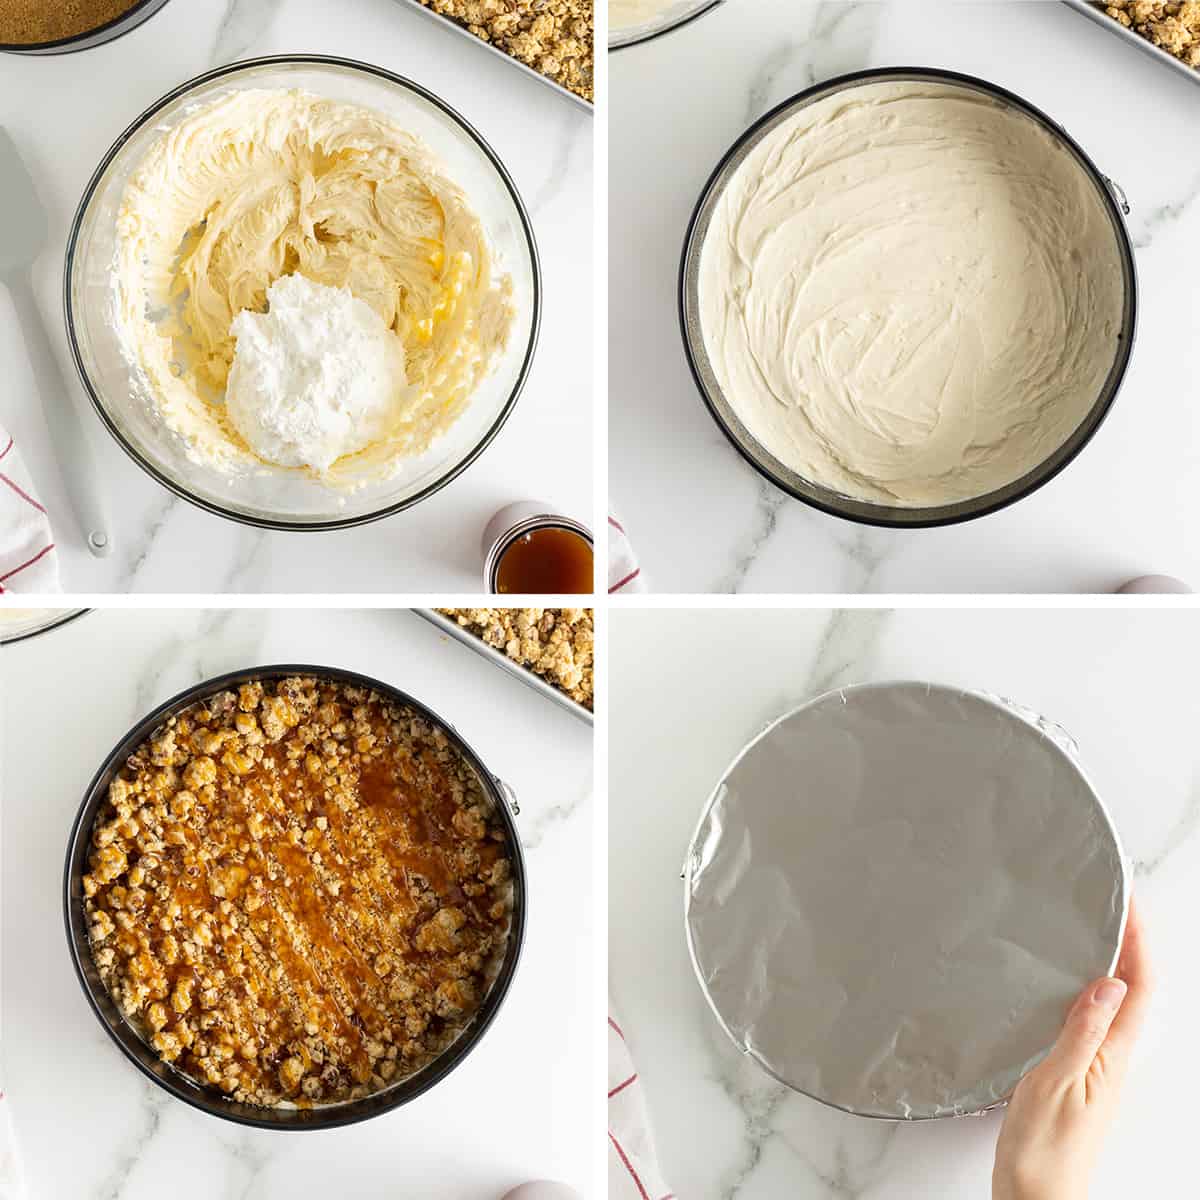 Four images of a cream cheese mixture in a bowl, spread into a springform pan, topped with a butter brickle and caramel, and covered with foil.